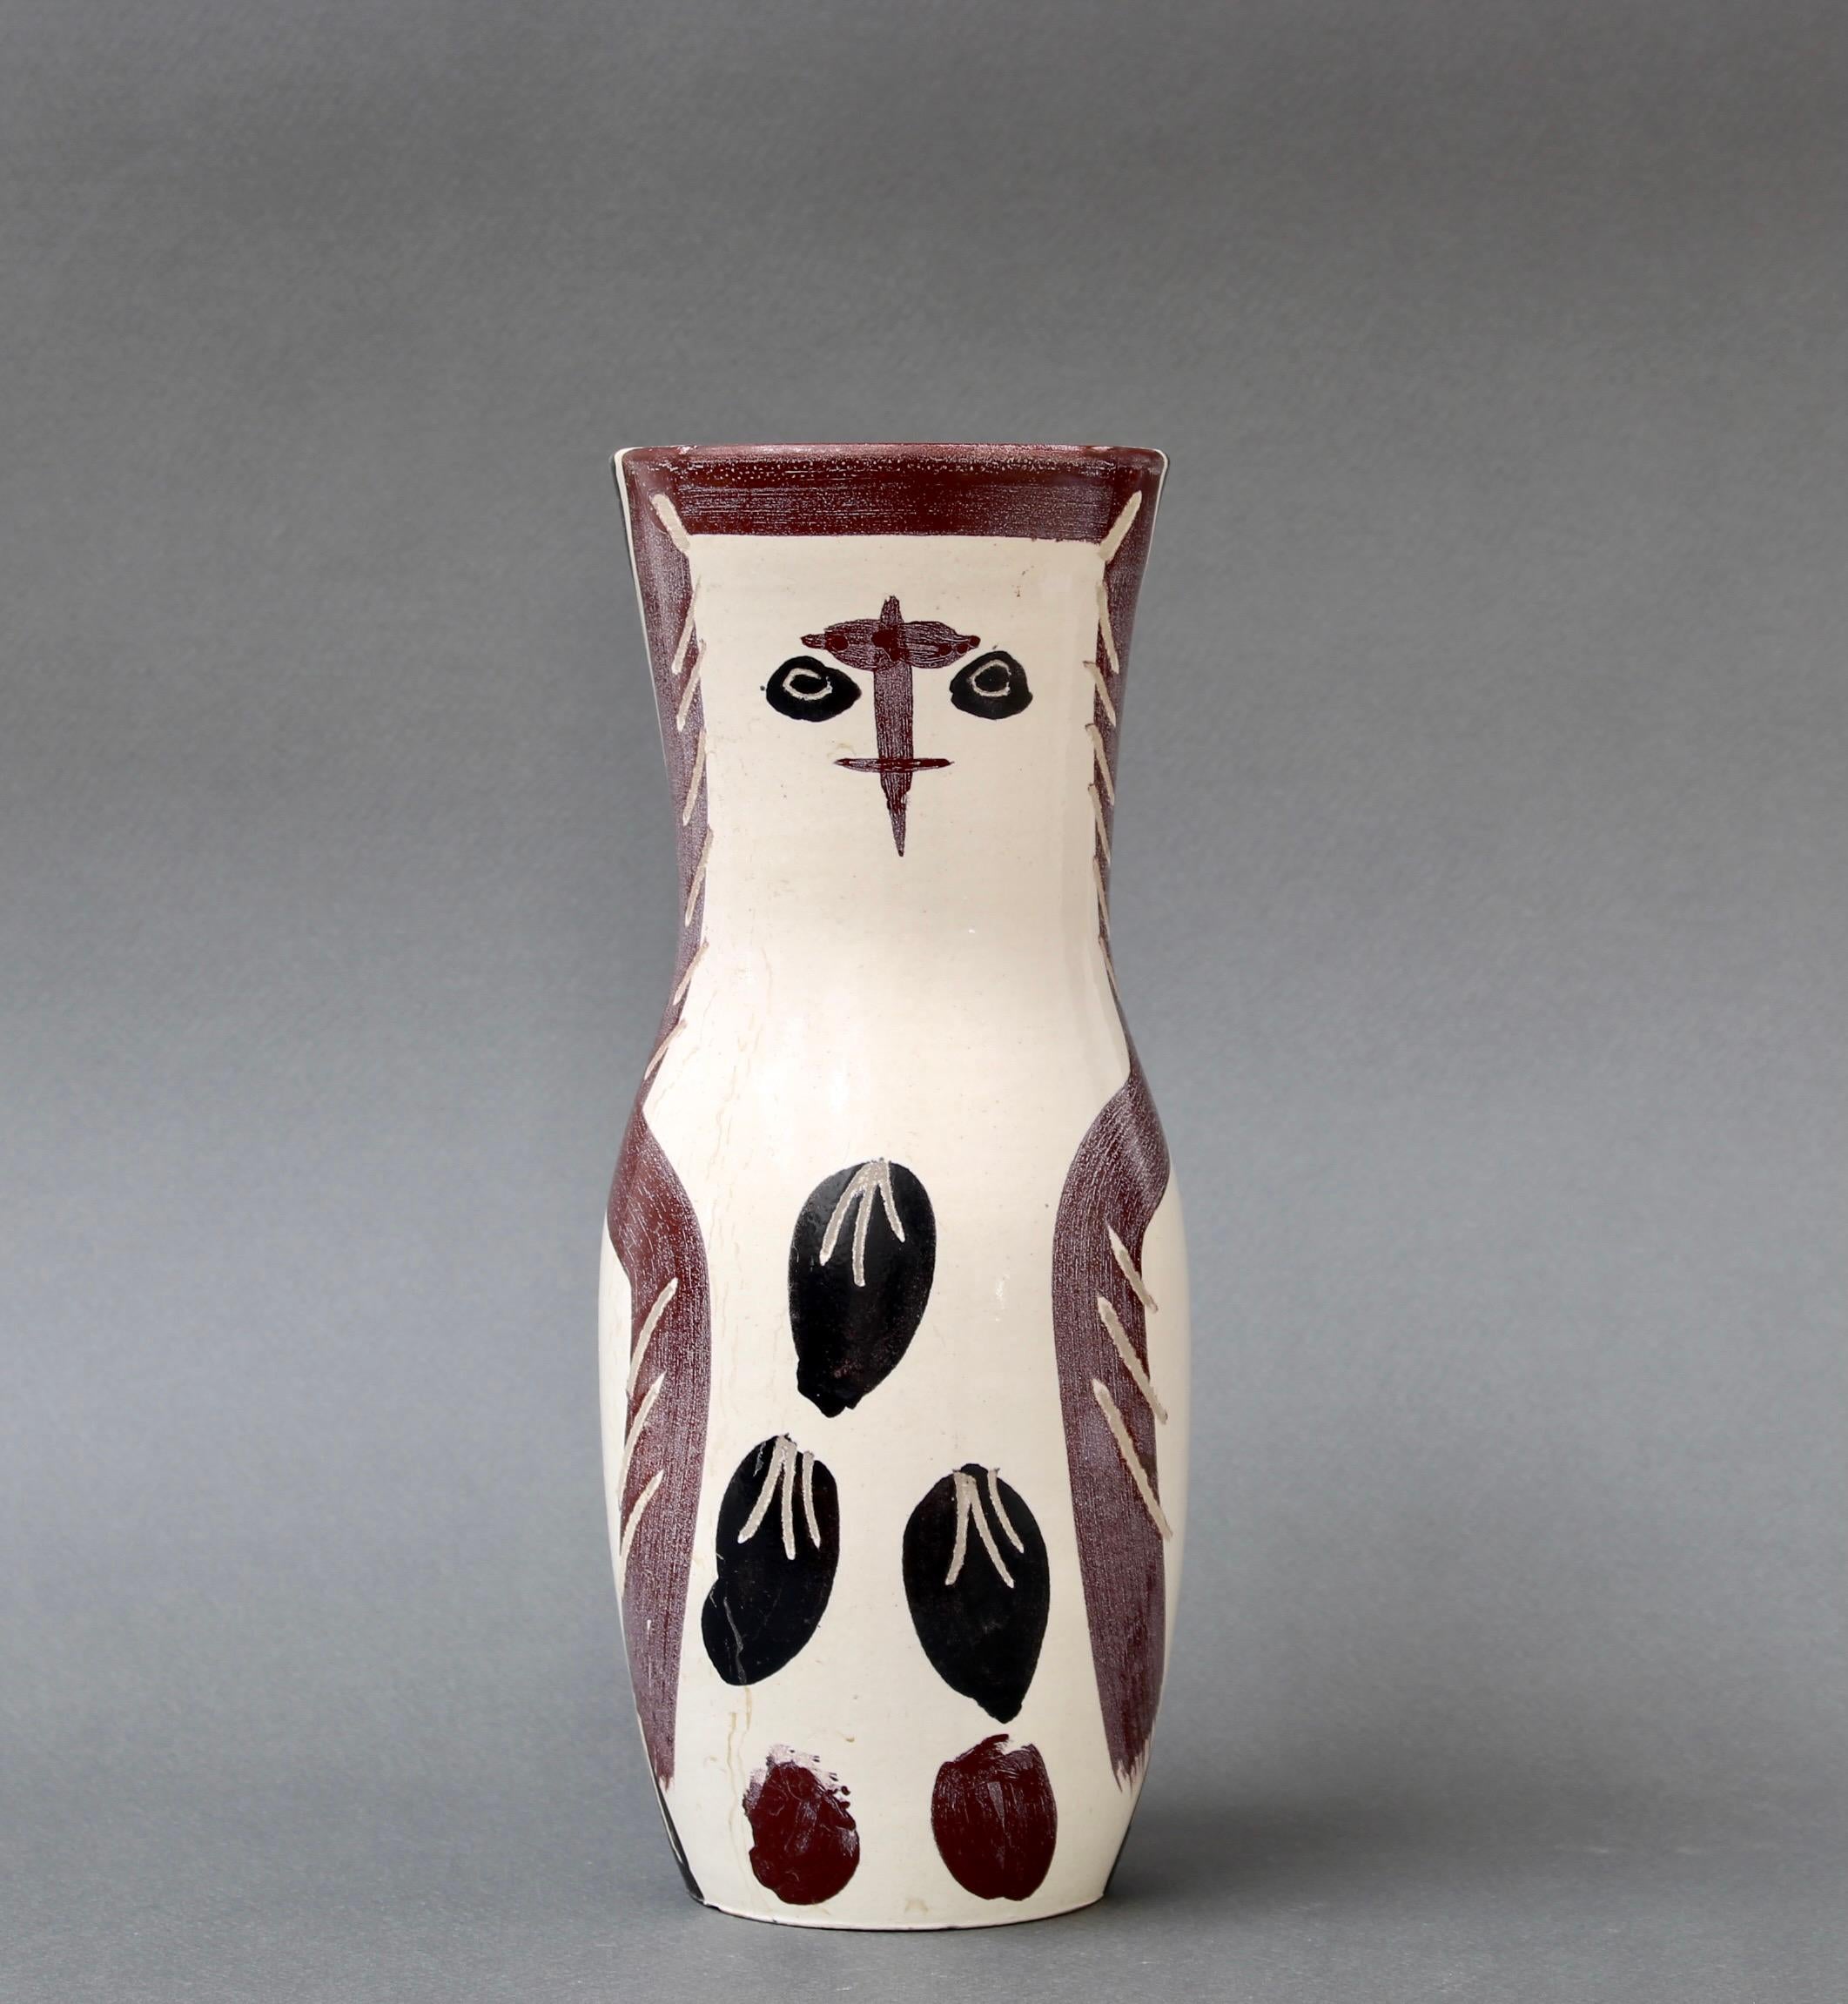 Ceramic Owl Vase (A.R. 135) from the Madoura Pottery by Pablo Picasso For Sale 1